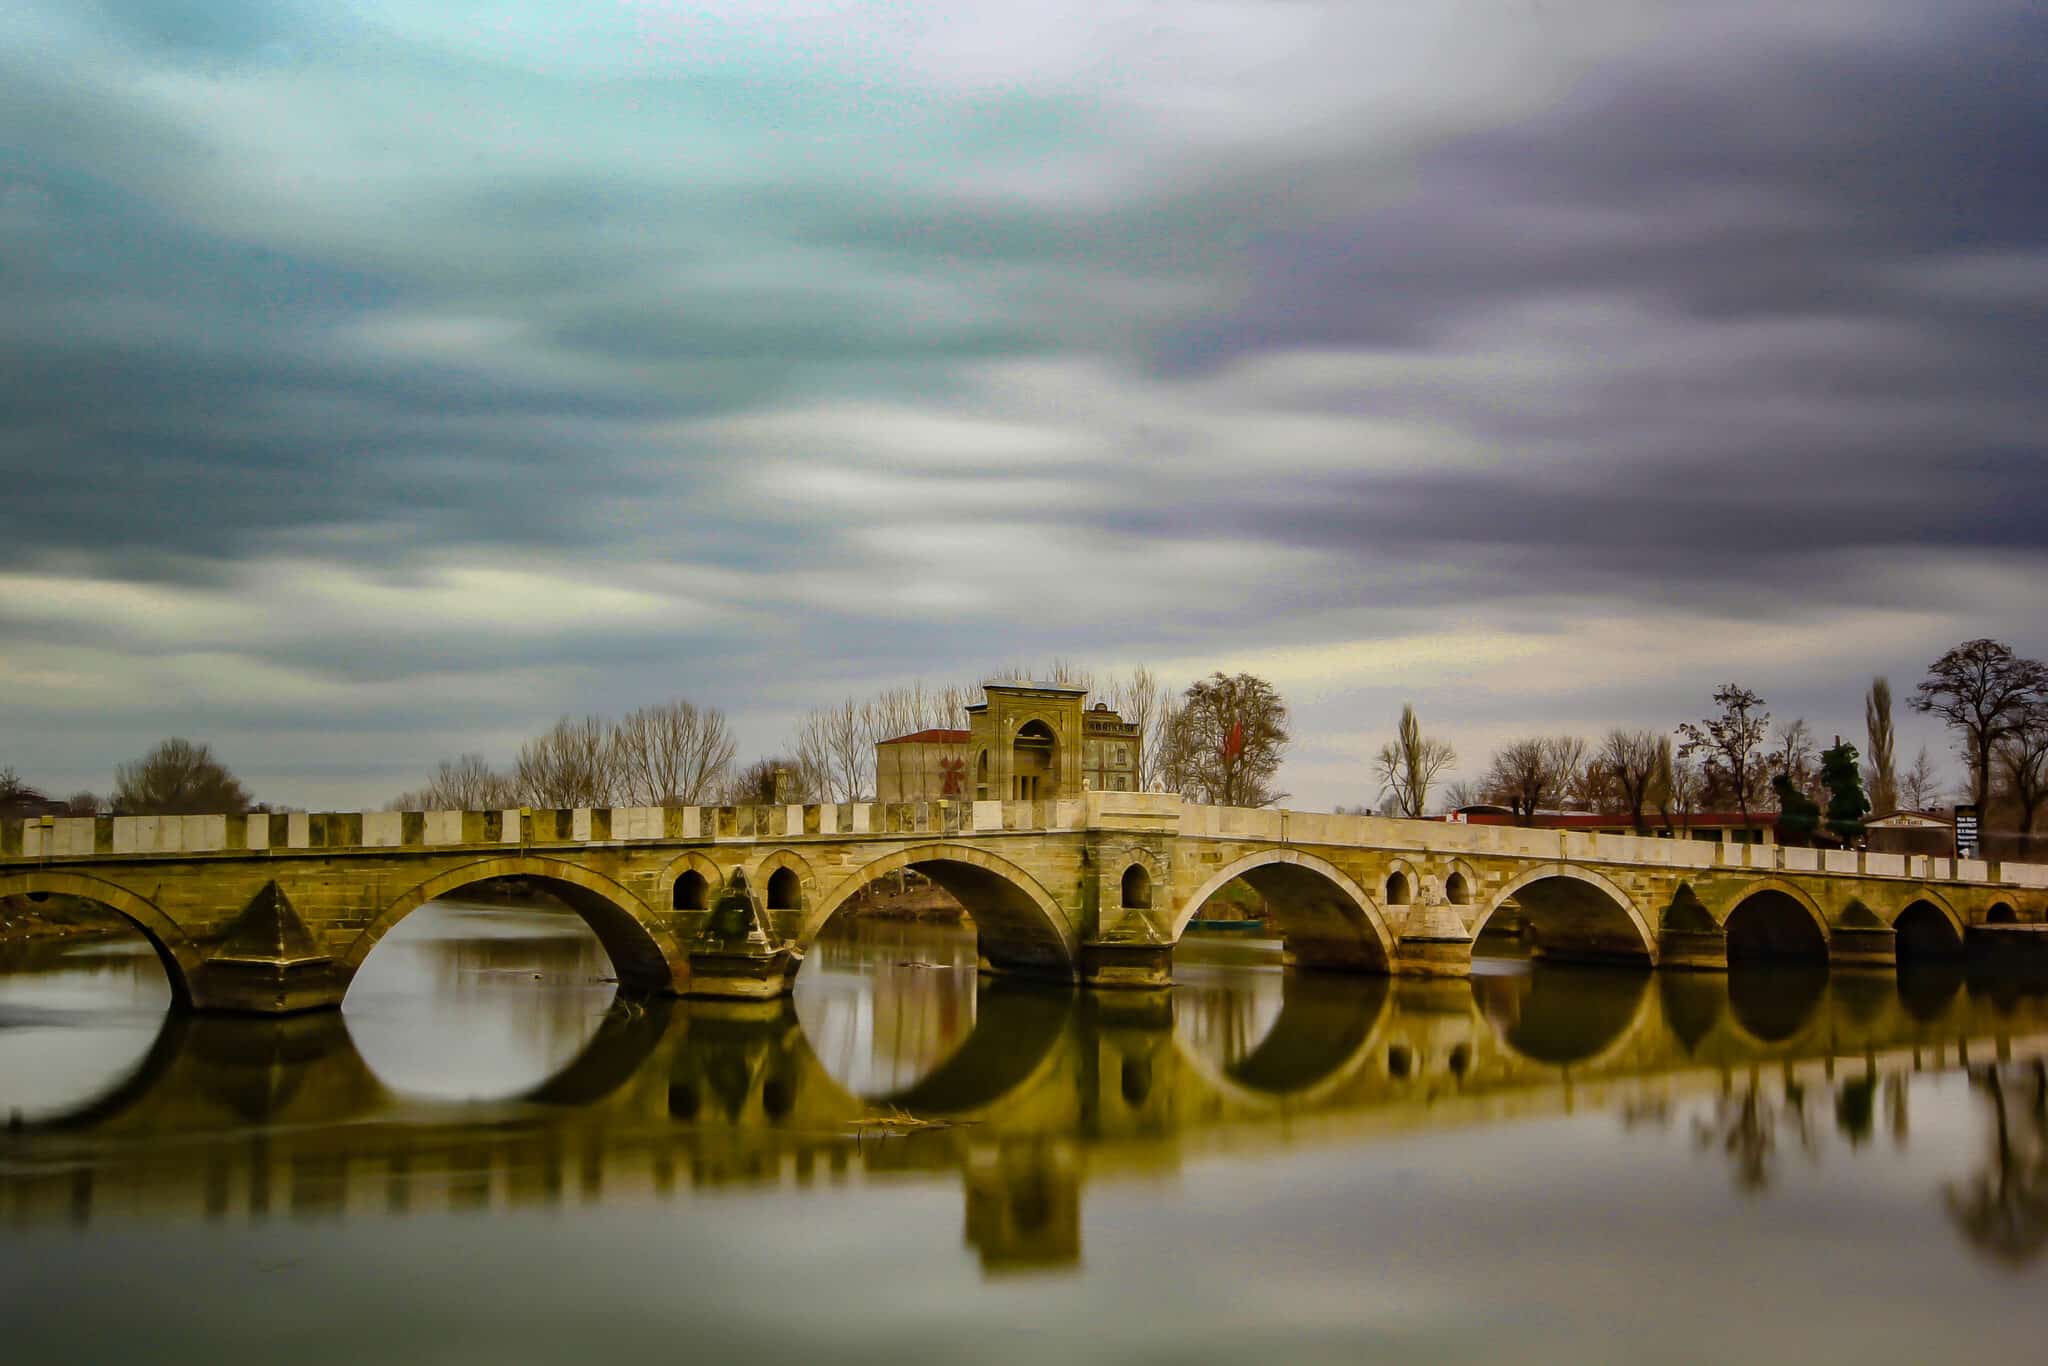 edirne Old arched bridge over peaceful river on overcast day